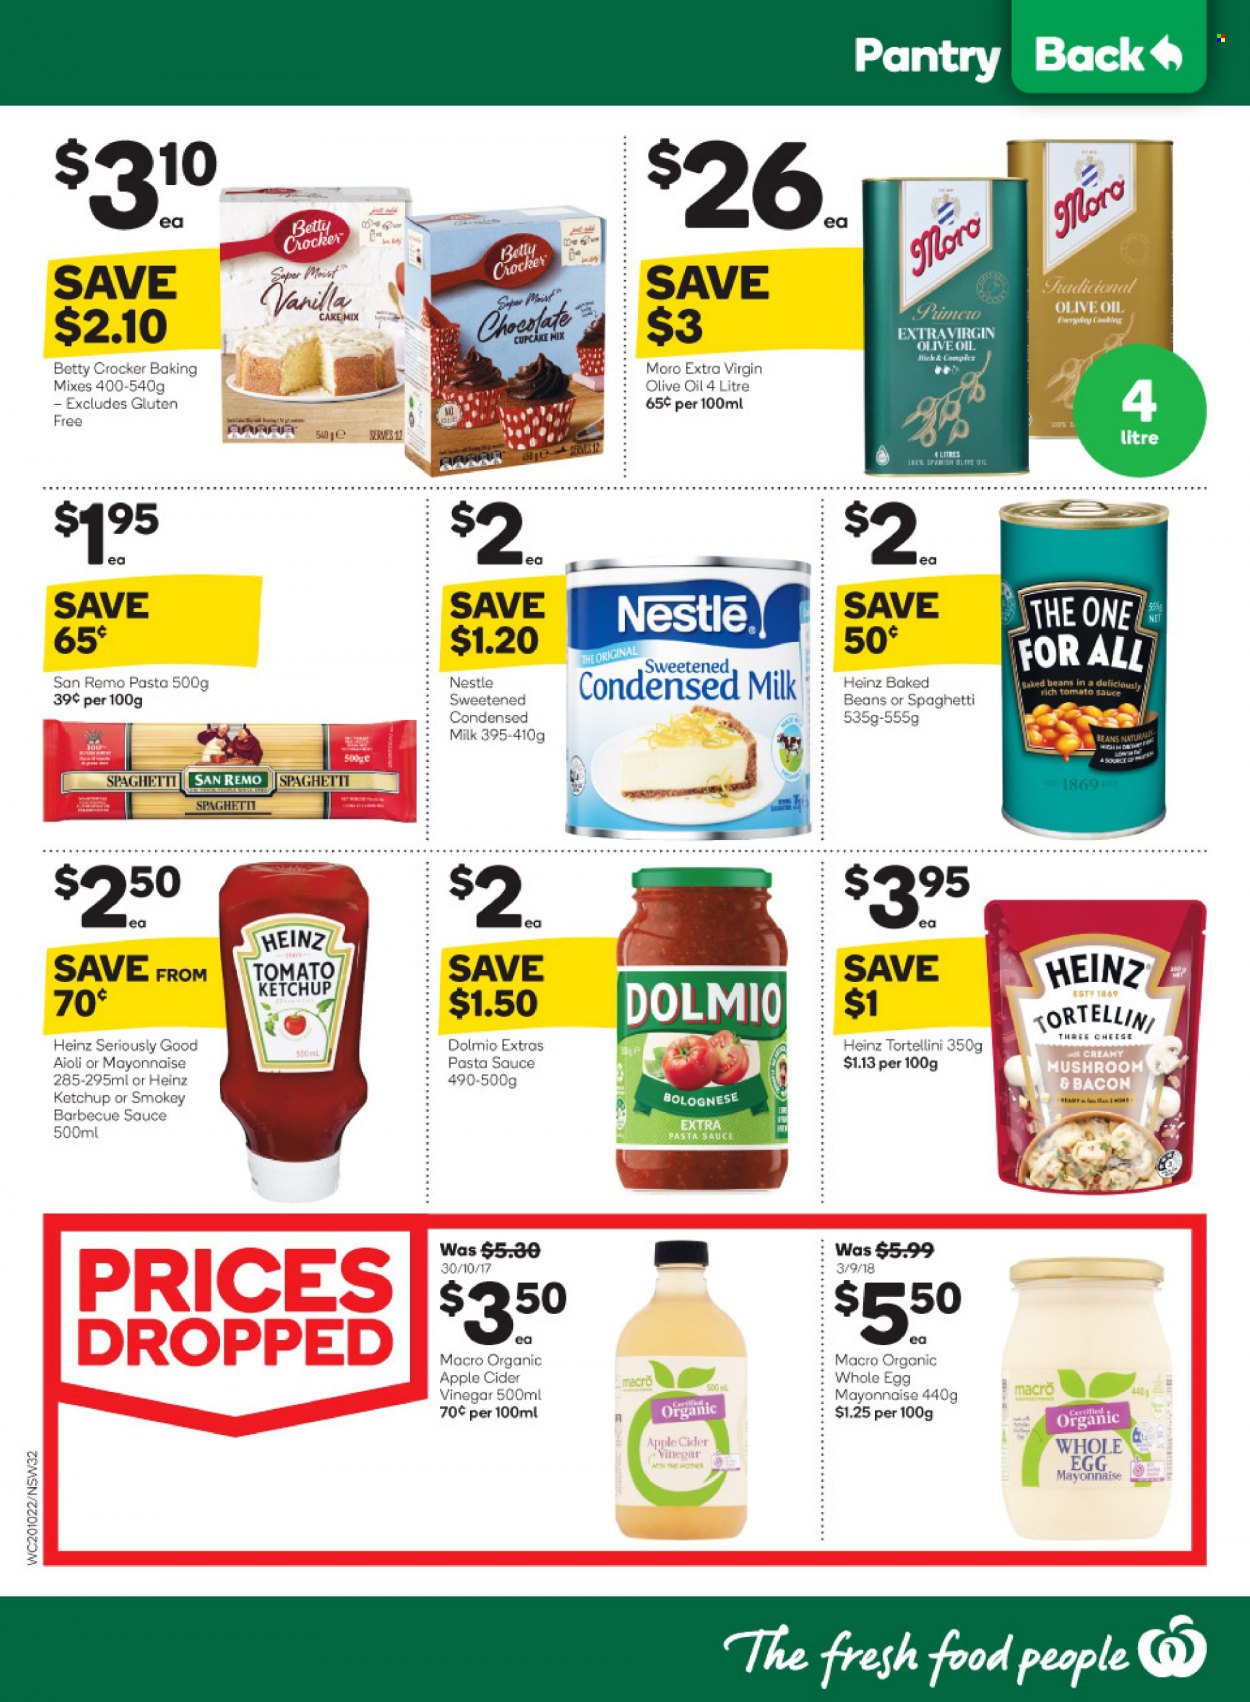 thumbnail - Woolworths Catalogue - 20 Oct 2021 - 26 Oct 2021 - Sales products - cake mix, cupcake mix, pasta sauce, sauce, tortellini, bacon, cheese, milk, condensed milk, eggs, mayonnaise, Nestlé, Heinz, baked beans, BBQ sauce, ketchup, apple cider vinegar, extra virgin olive oil, vinegar, olive oil, oil, bra. Page 32.